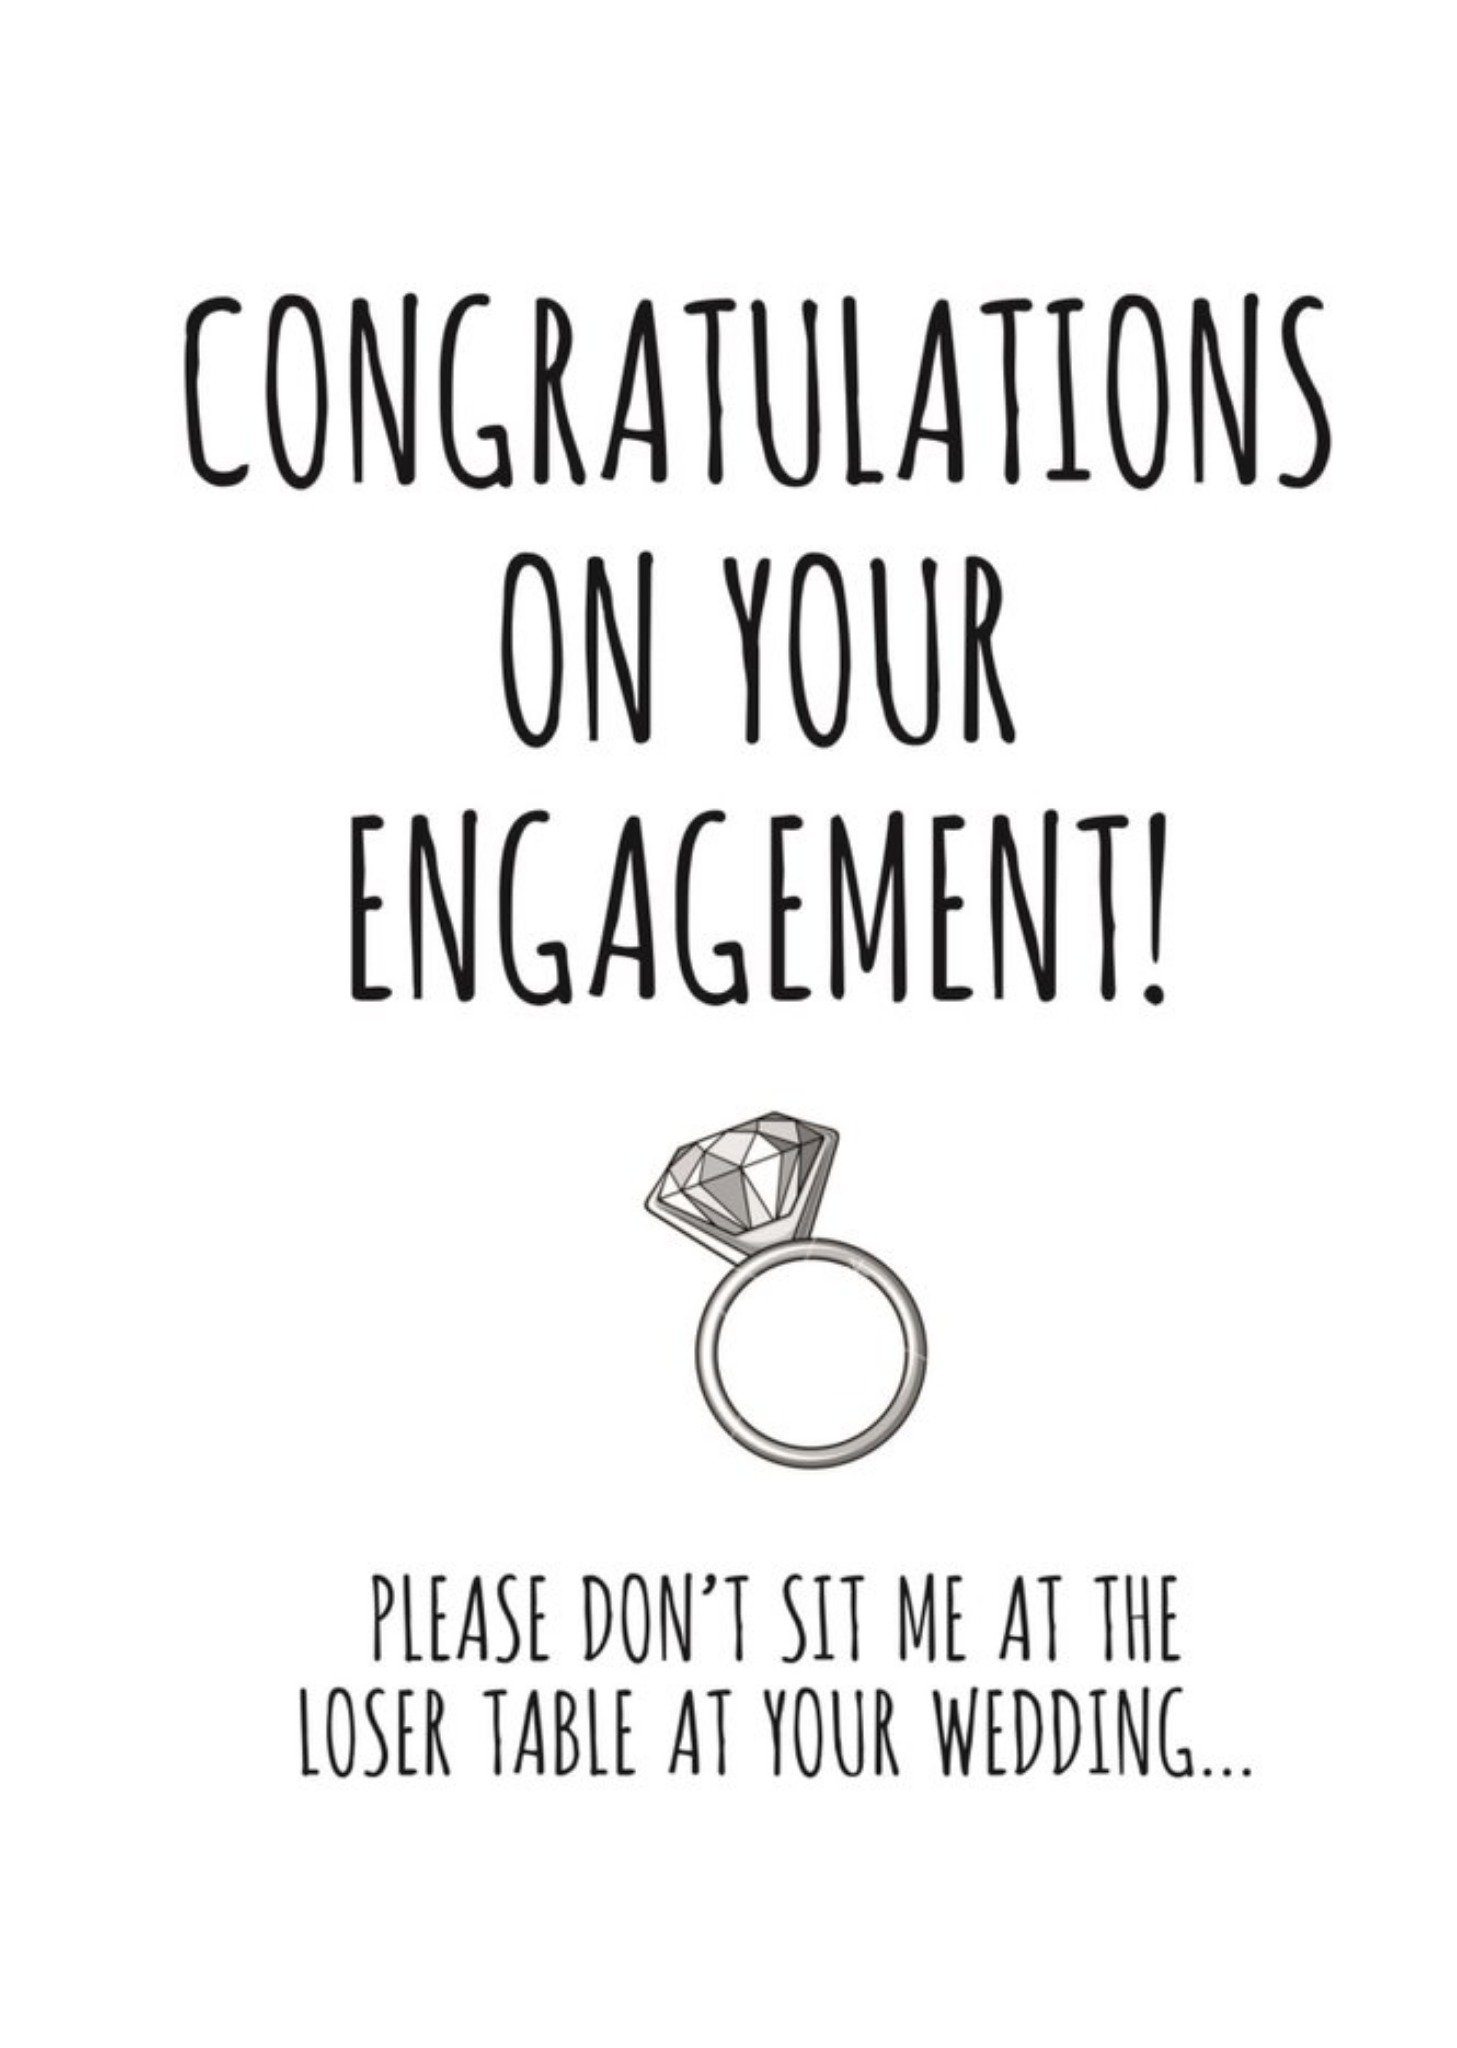 Banter King Typographical Congratulations On Your Engagement Please Dont Sit Me At The Loser Table C